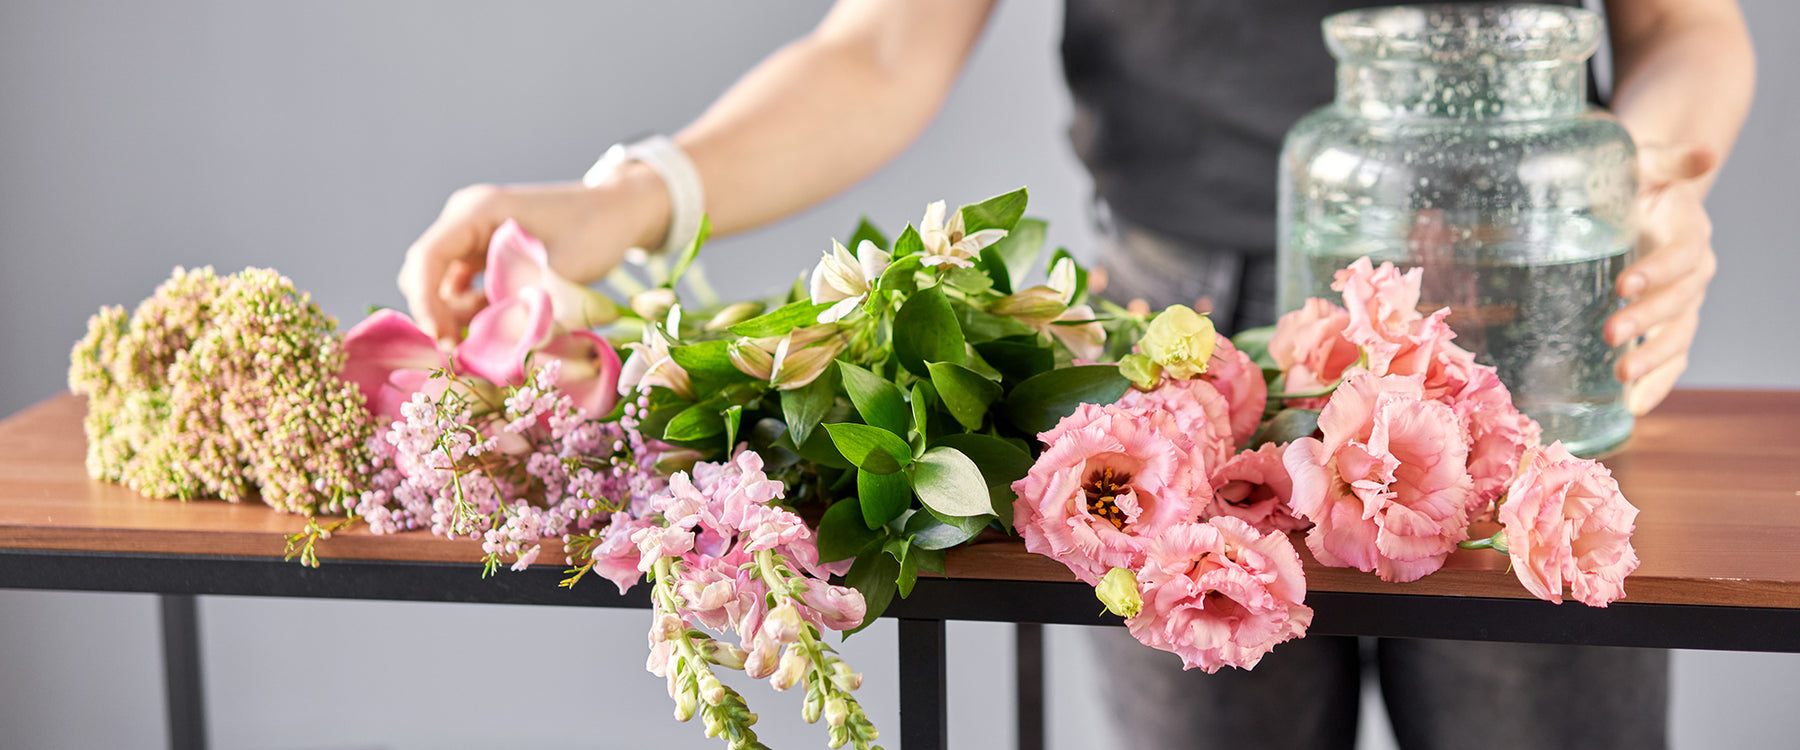 how to cut fake flowers